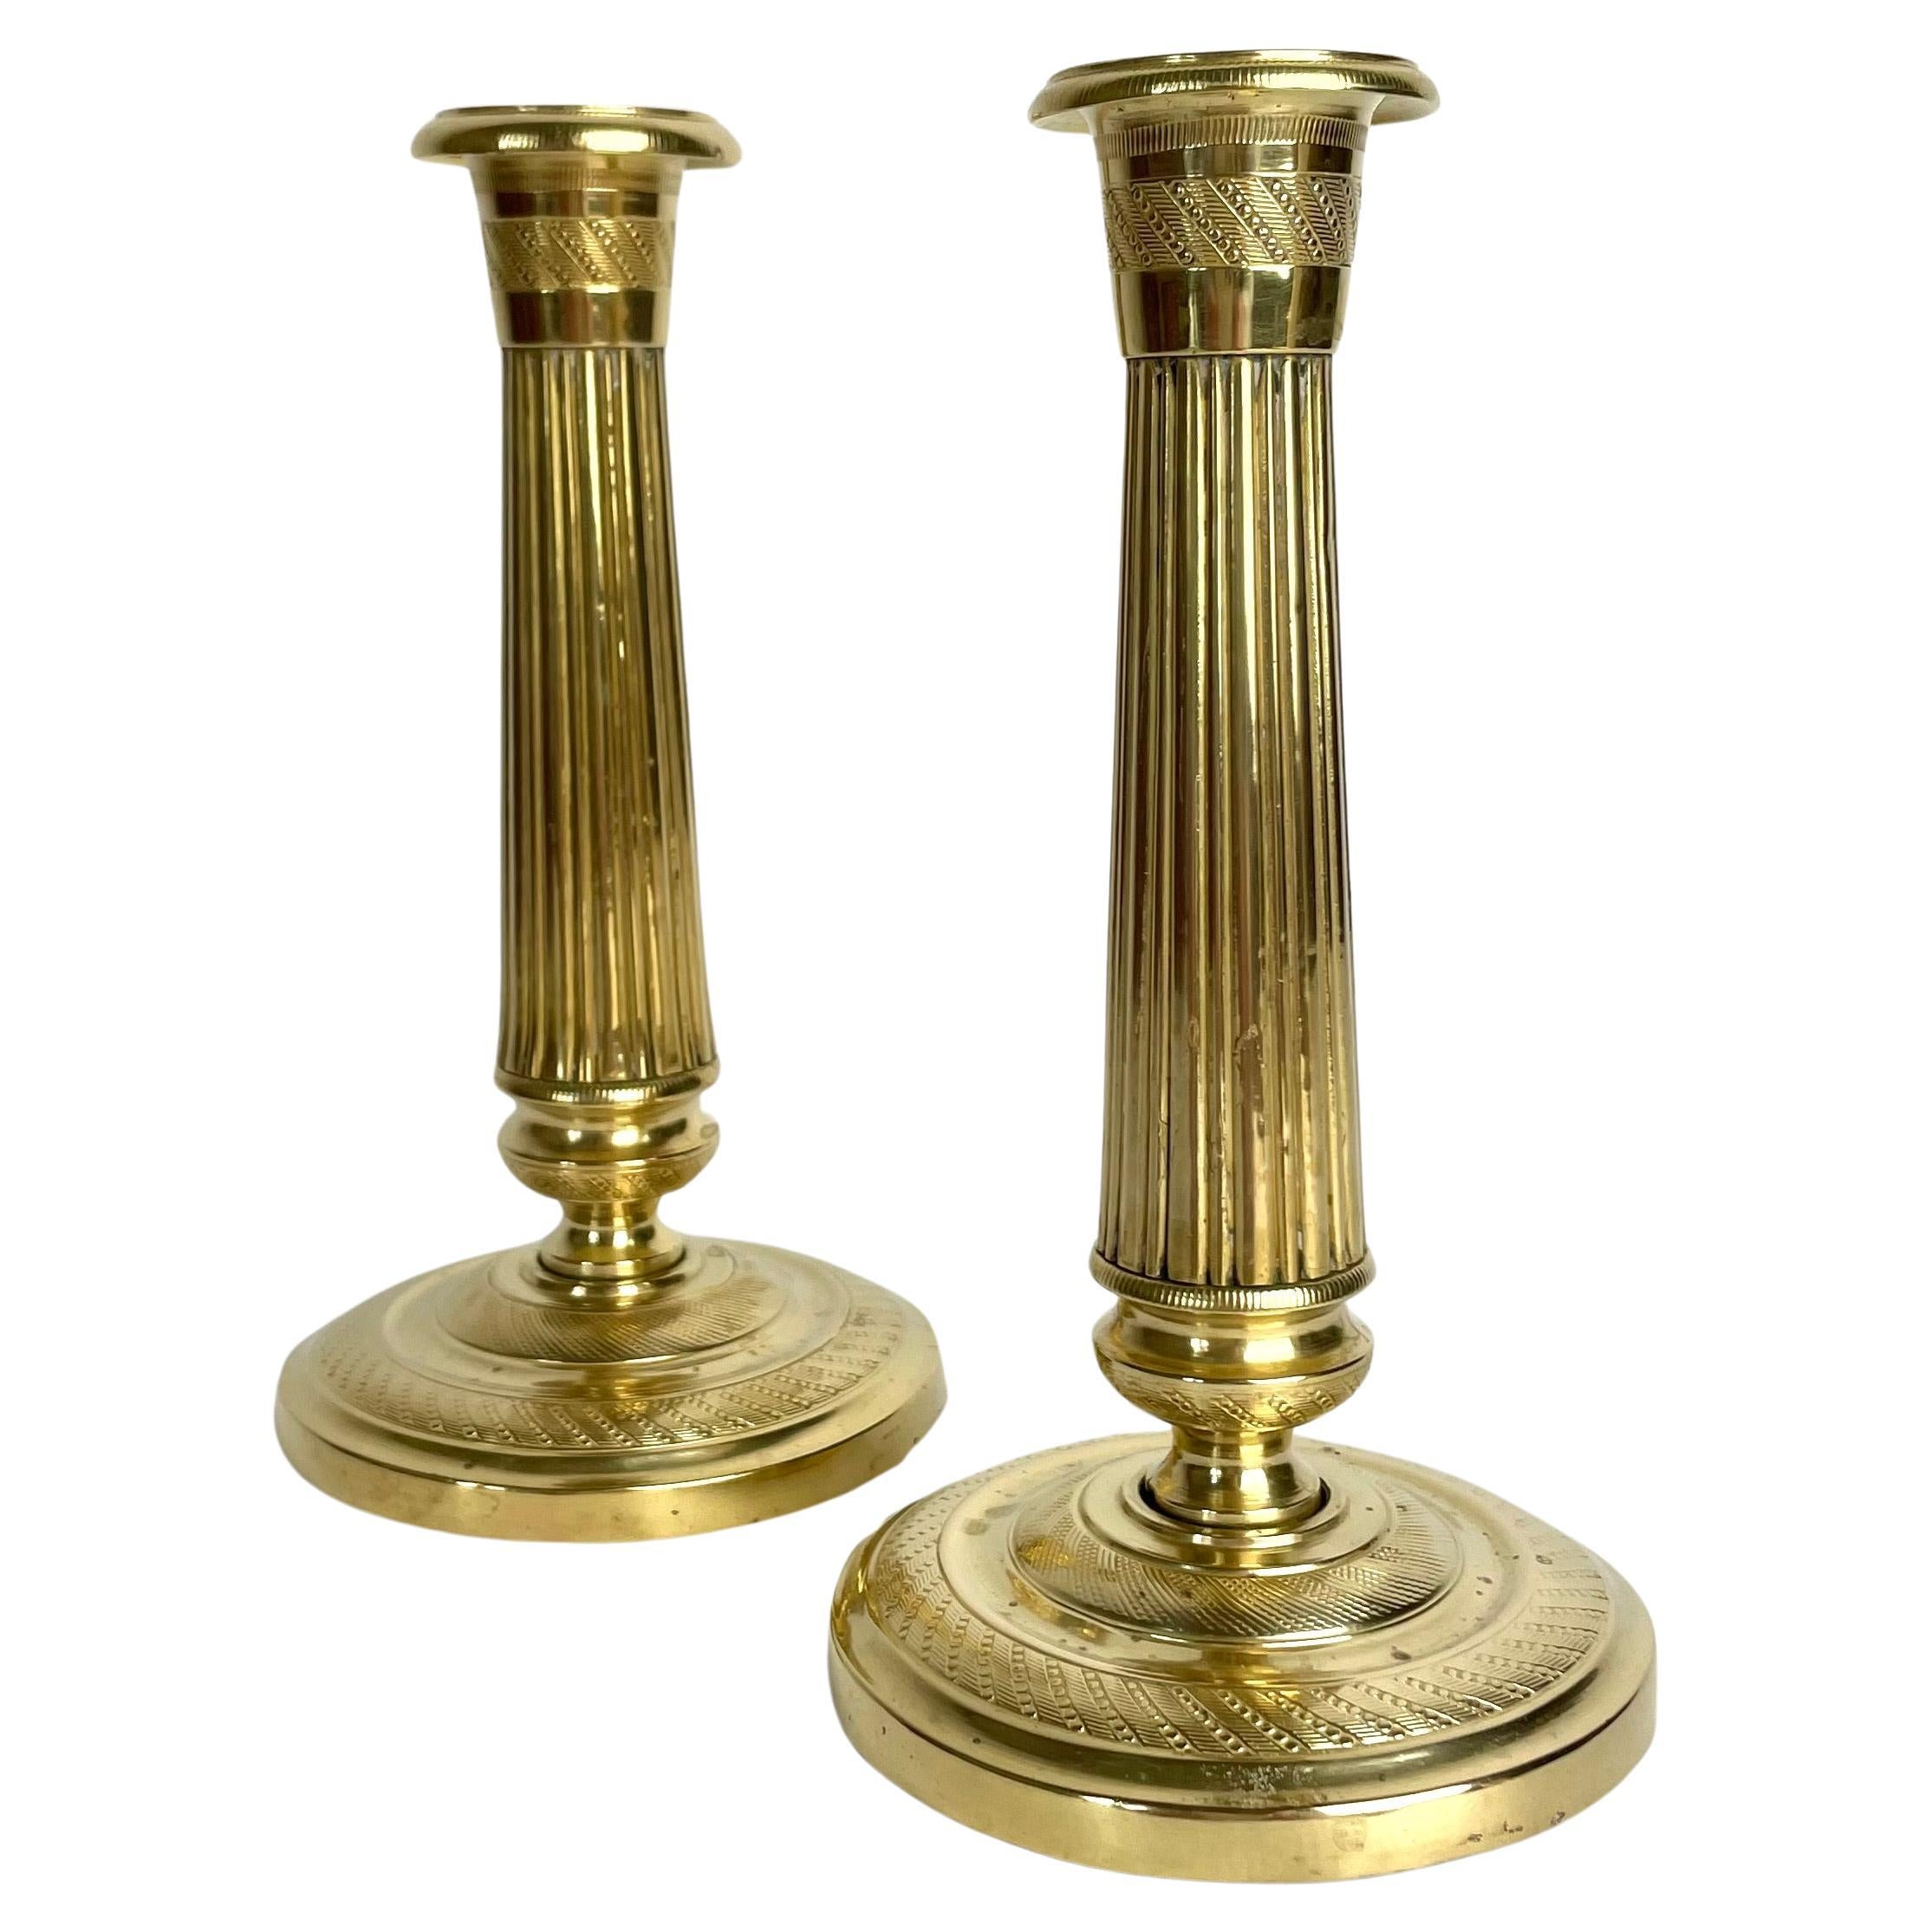 A beautiful pair of small Empire candlesticks in gilt bronze from the 1820s